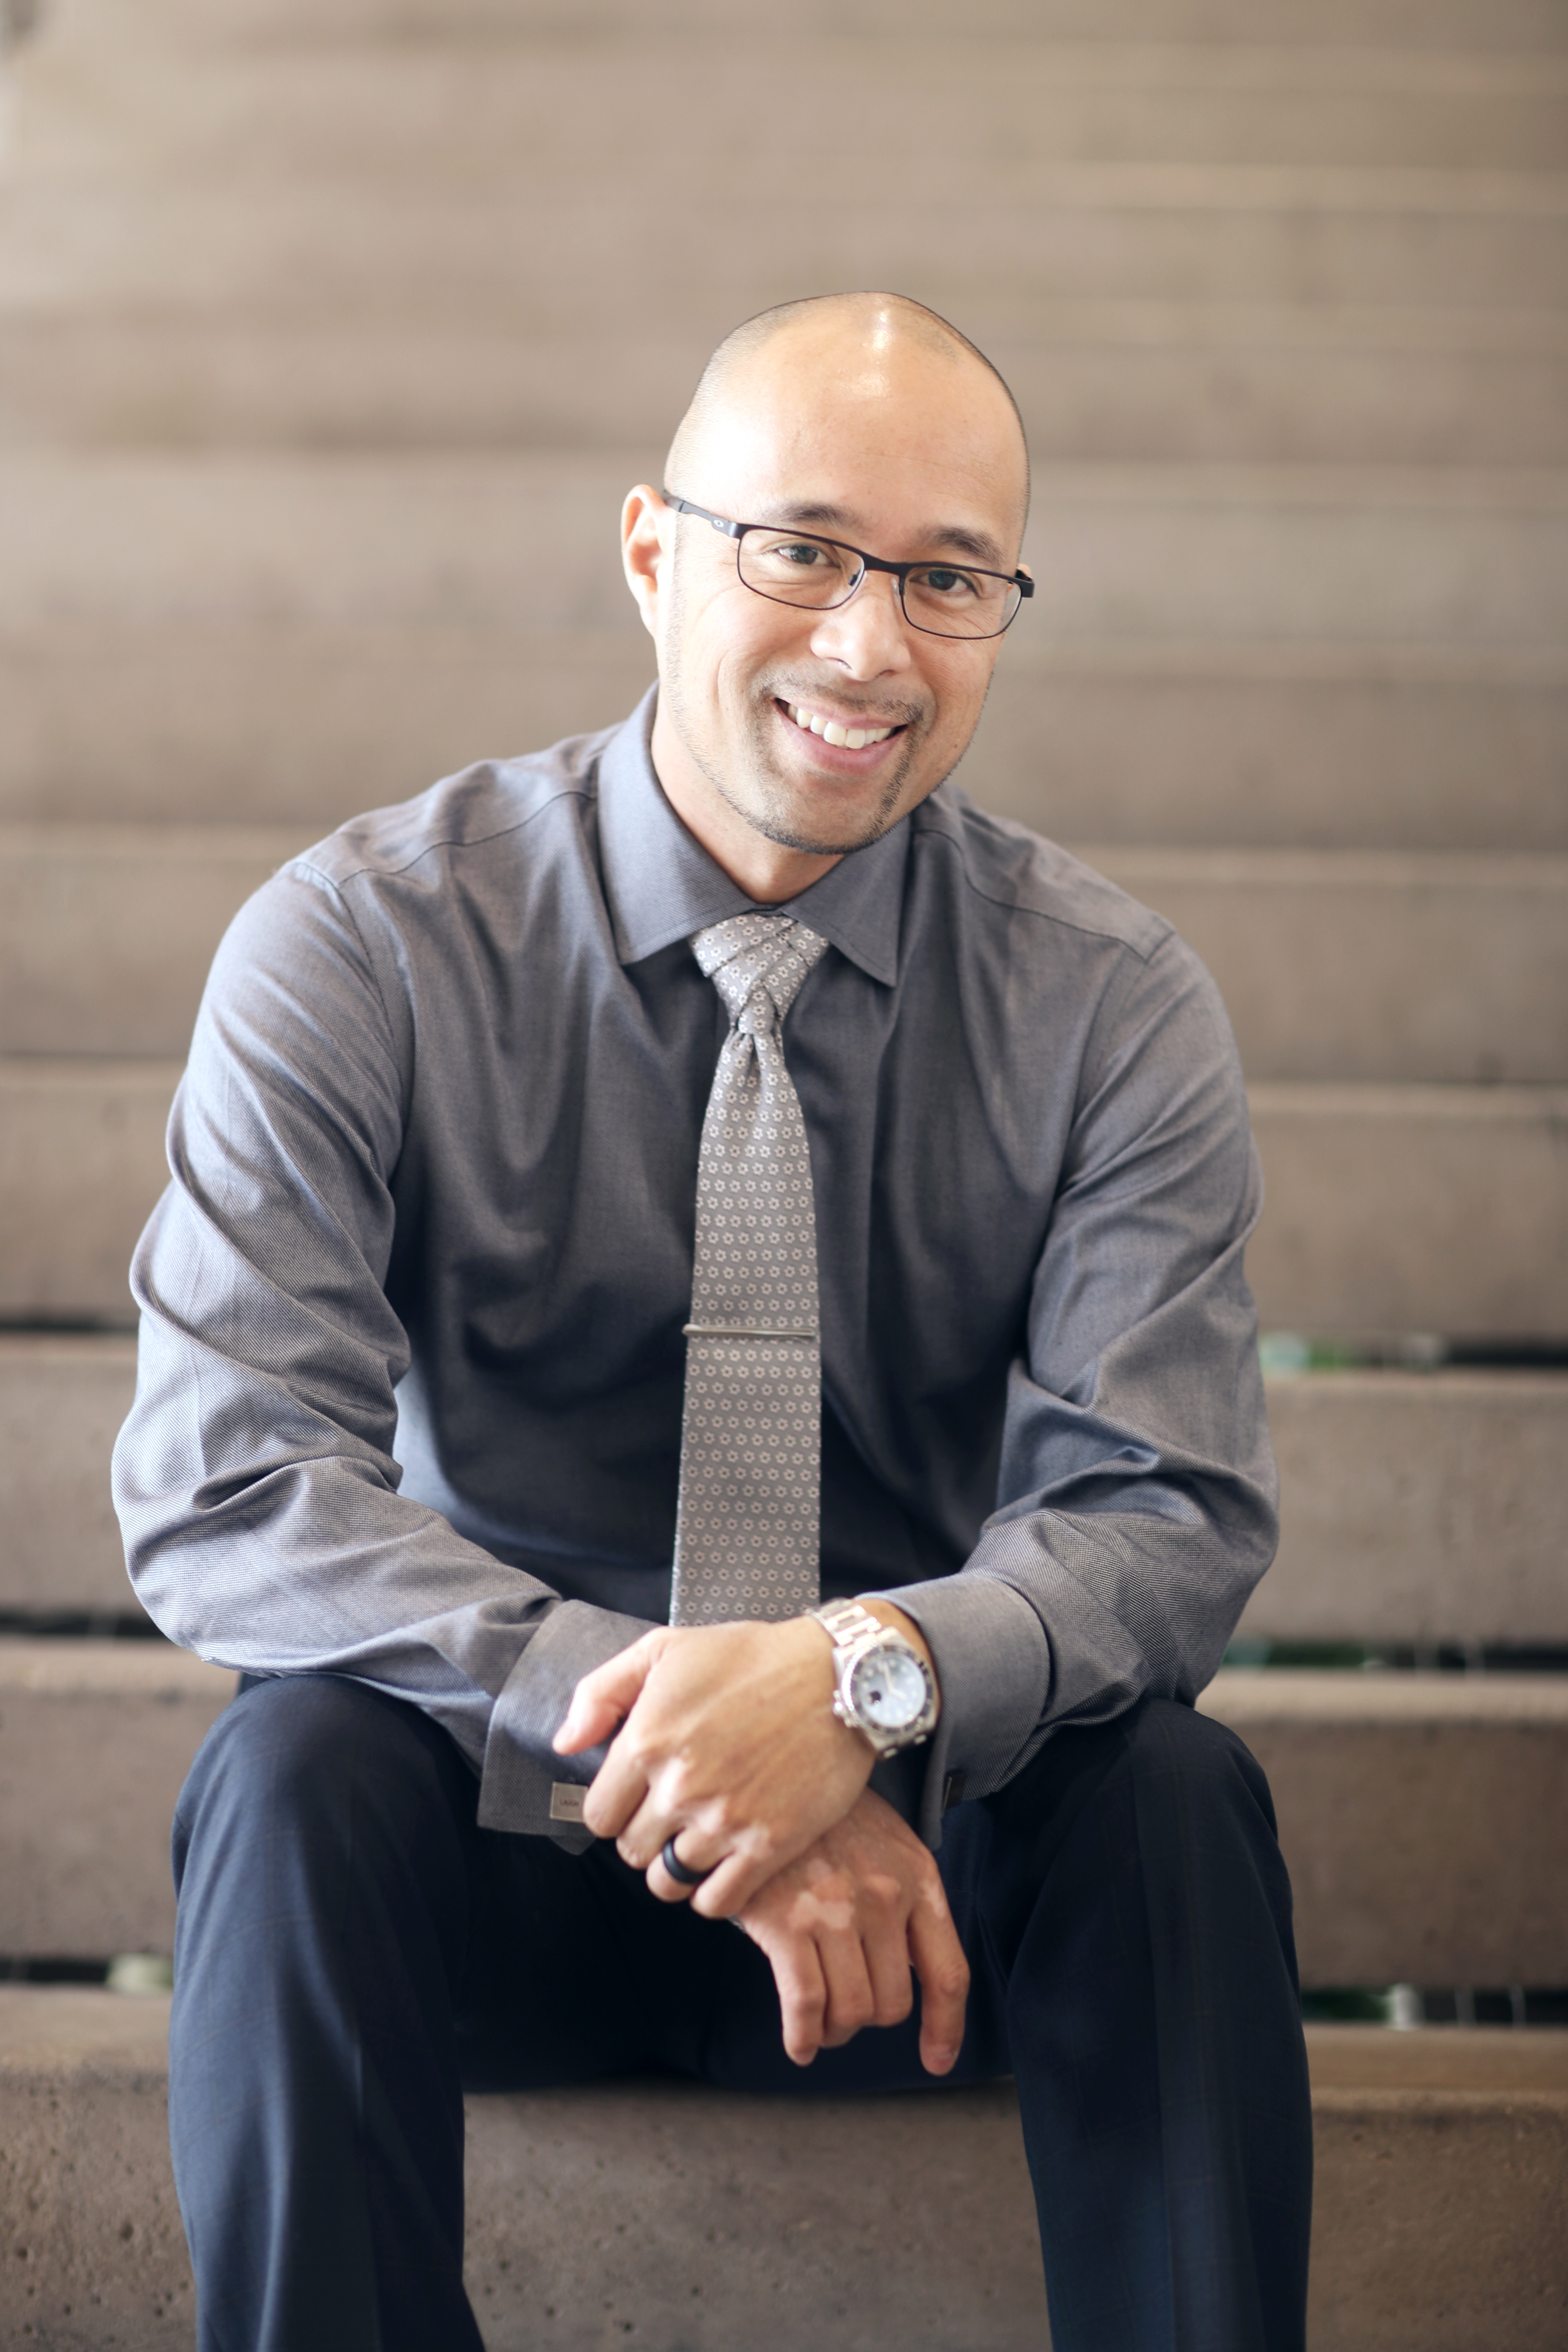 Dr. Elvin Hernandez smiling and sitting on stairs